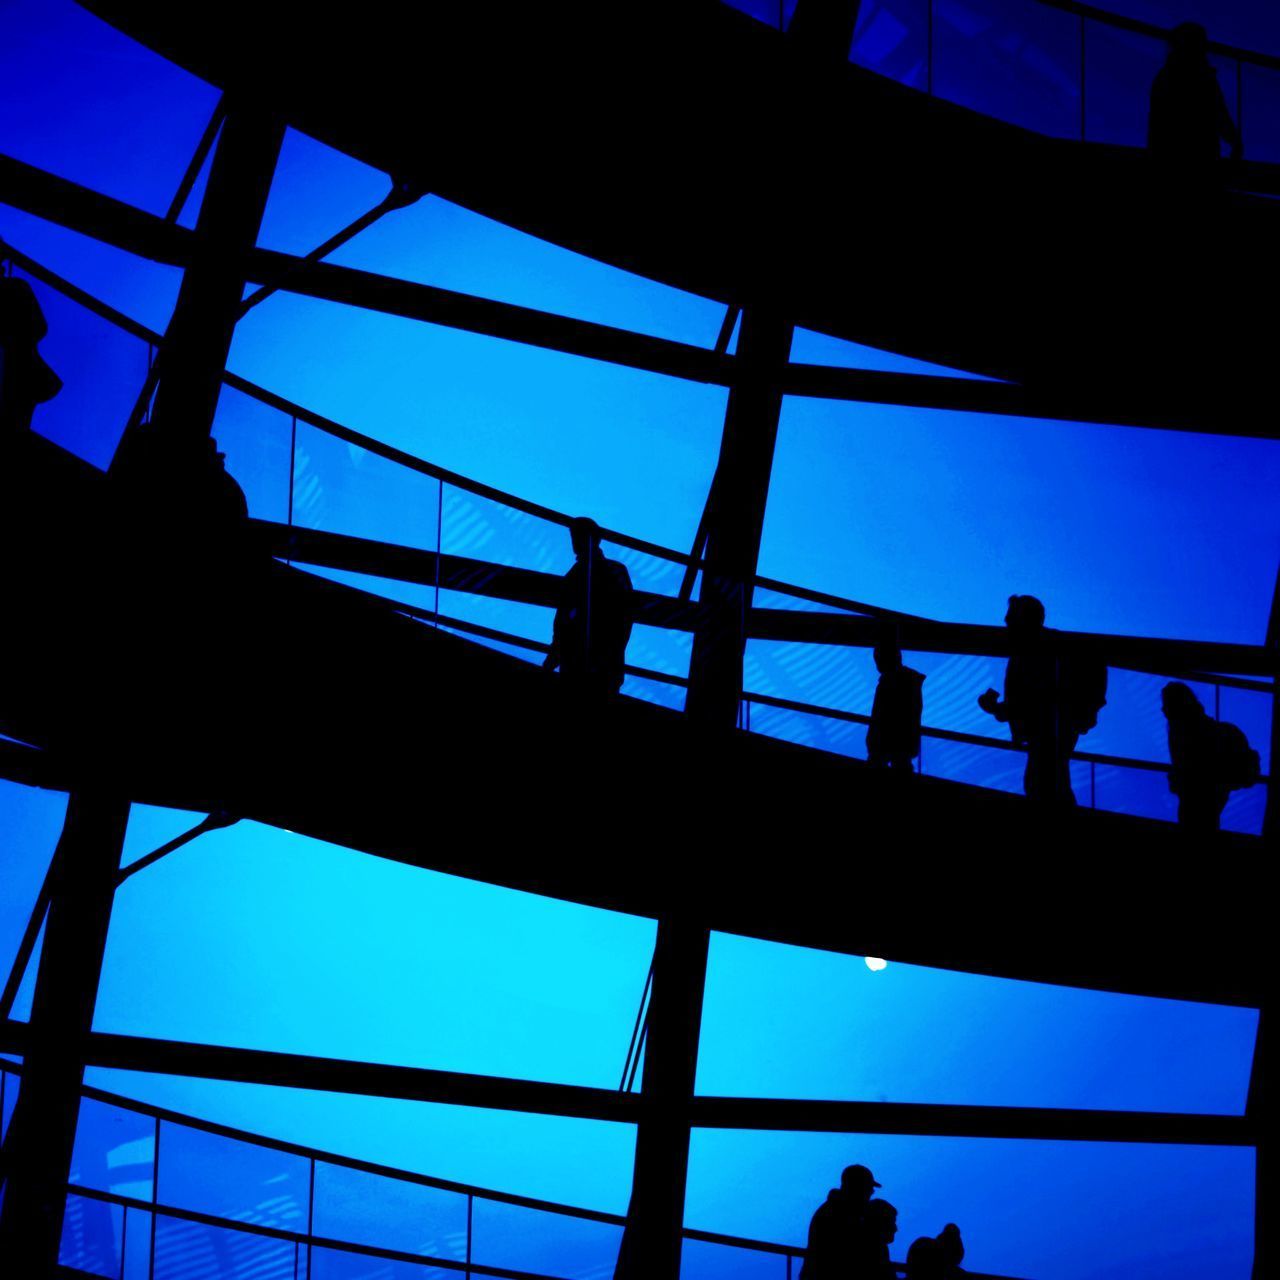 LOW ANGLE VIEW OF SILHOUETTE PEOPLE STANDING IN CITY AGAINST BLUE SKY